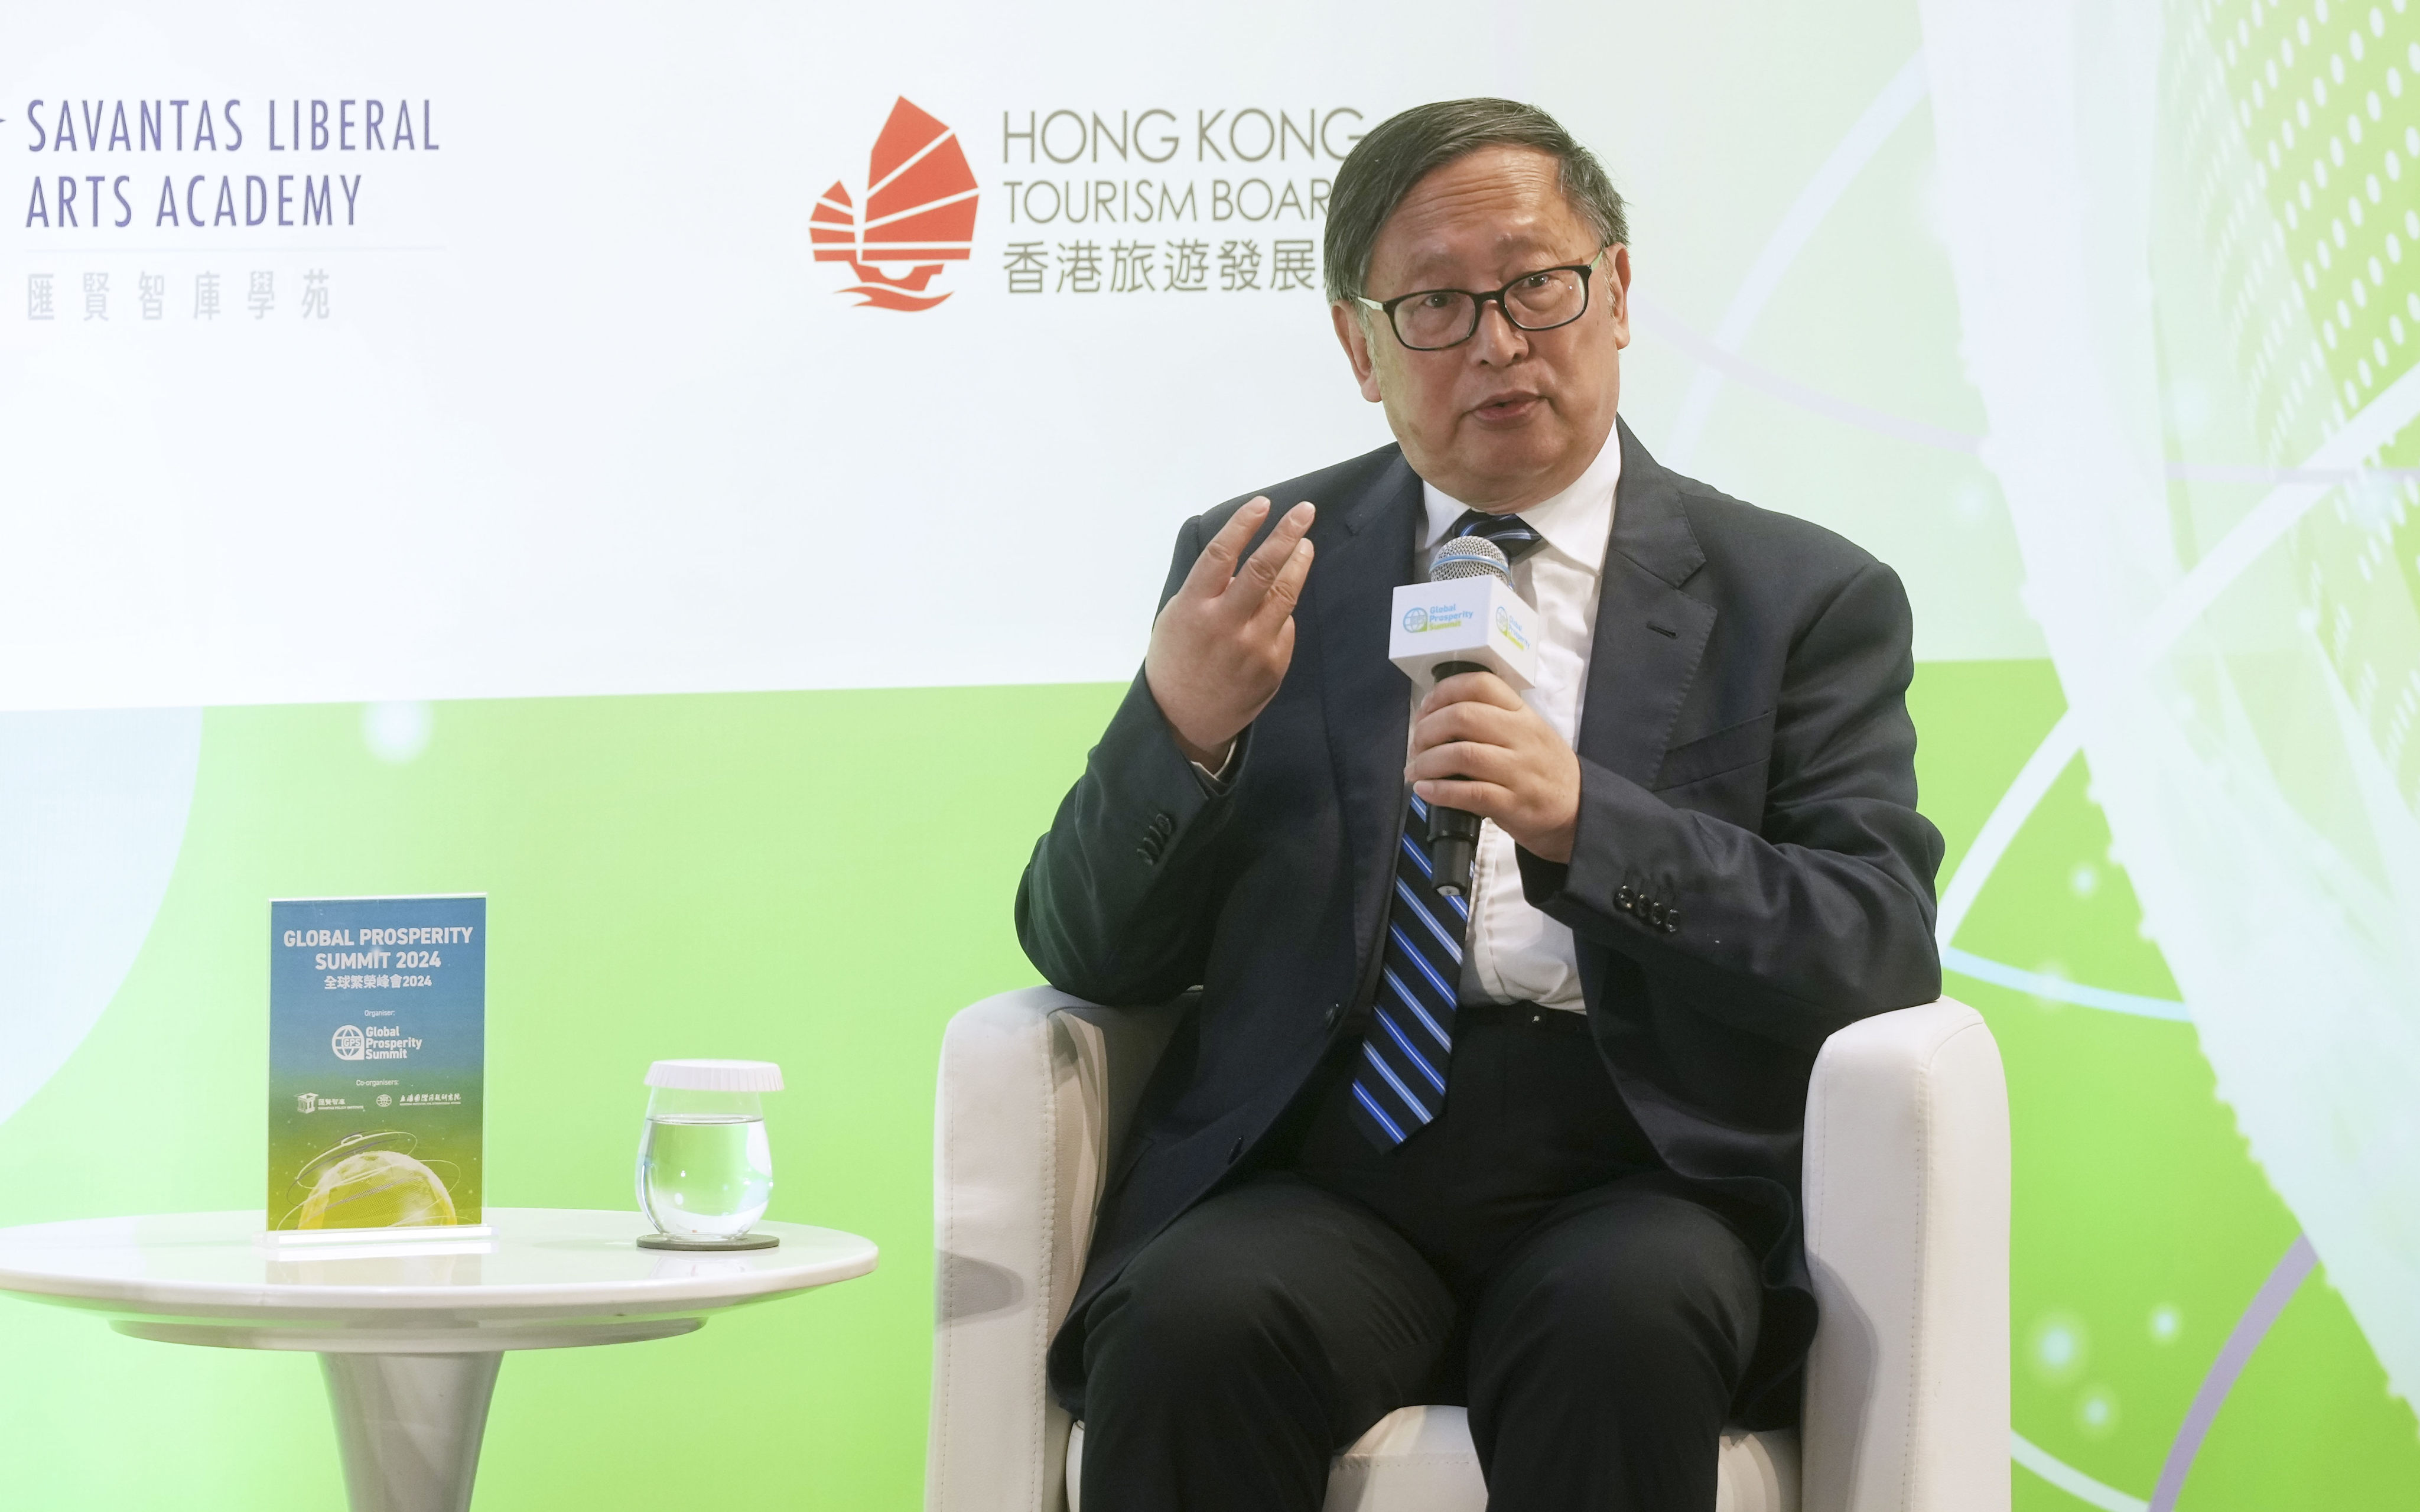 Yang Jiemian, chairman of the SIIS Academic Advisory Council, speaks at the Global Prosperity Summit in Hong Kong on Tuesday. Photo: Elson Li